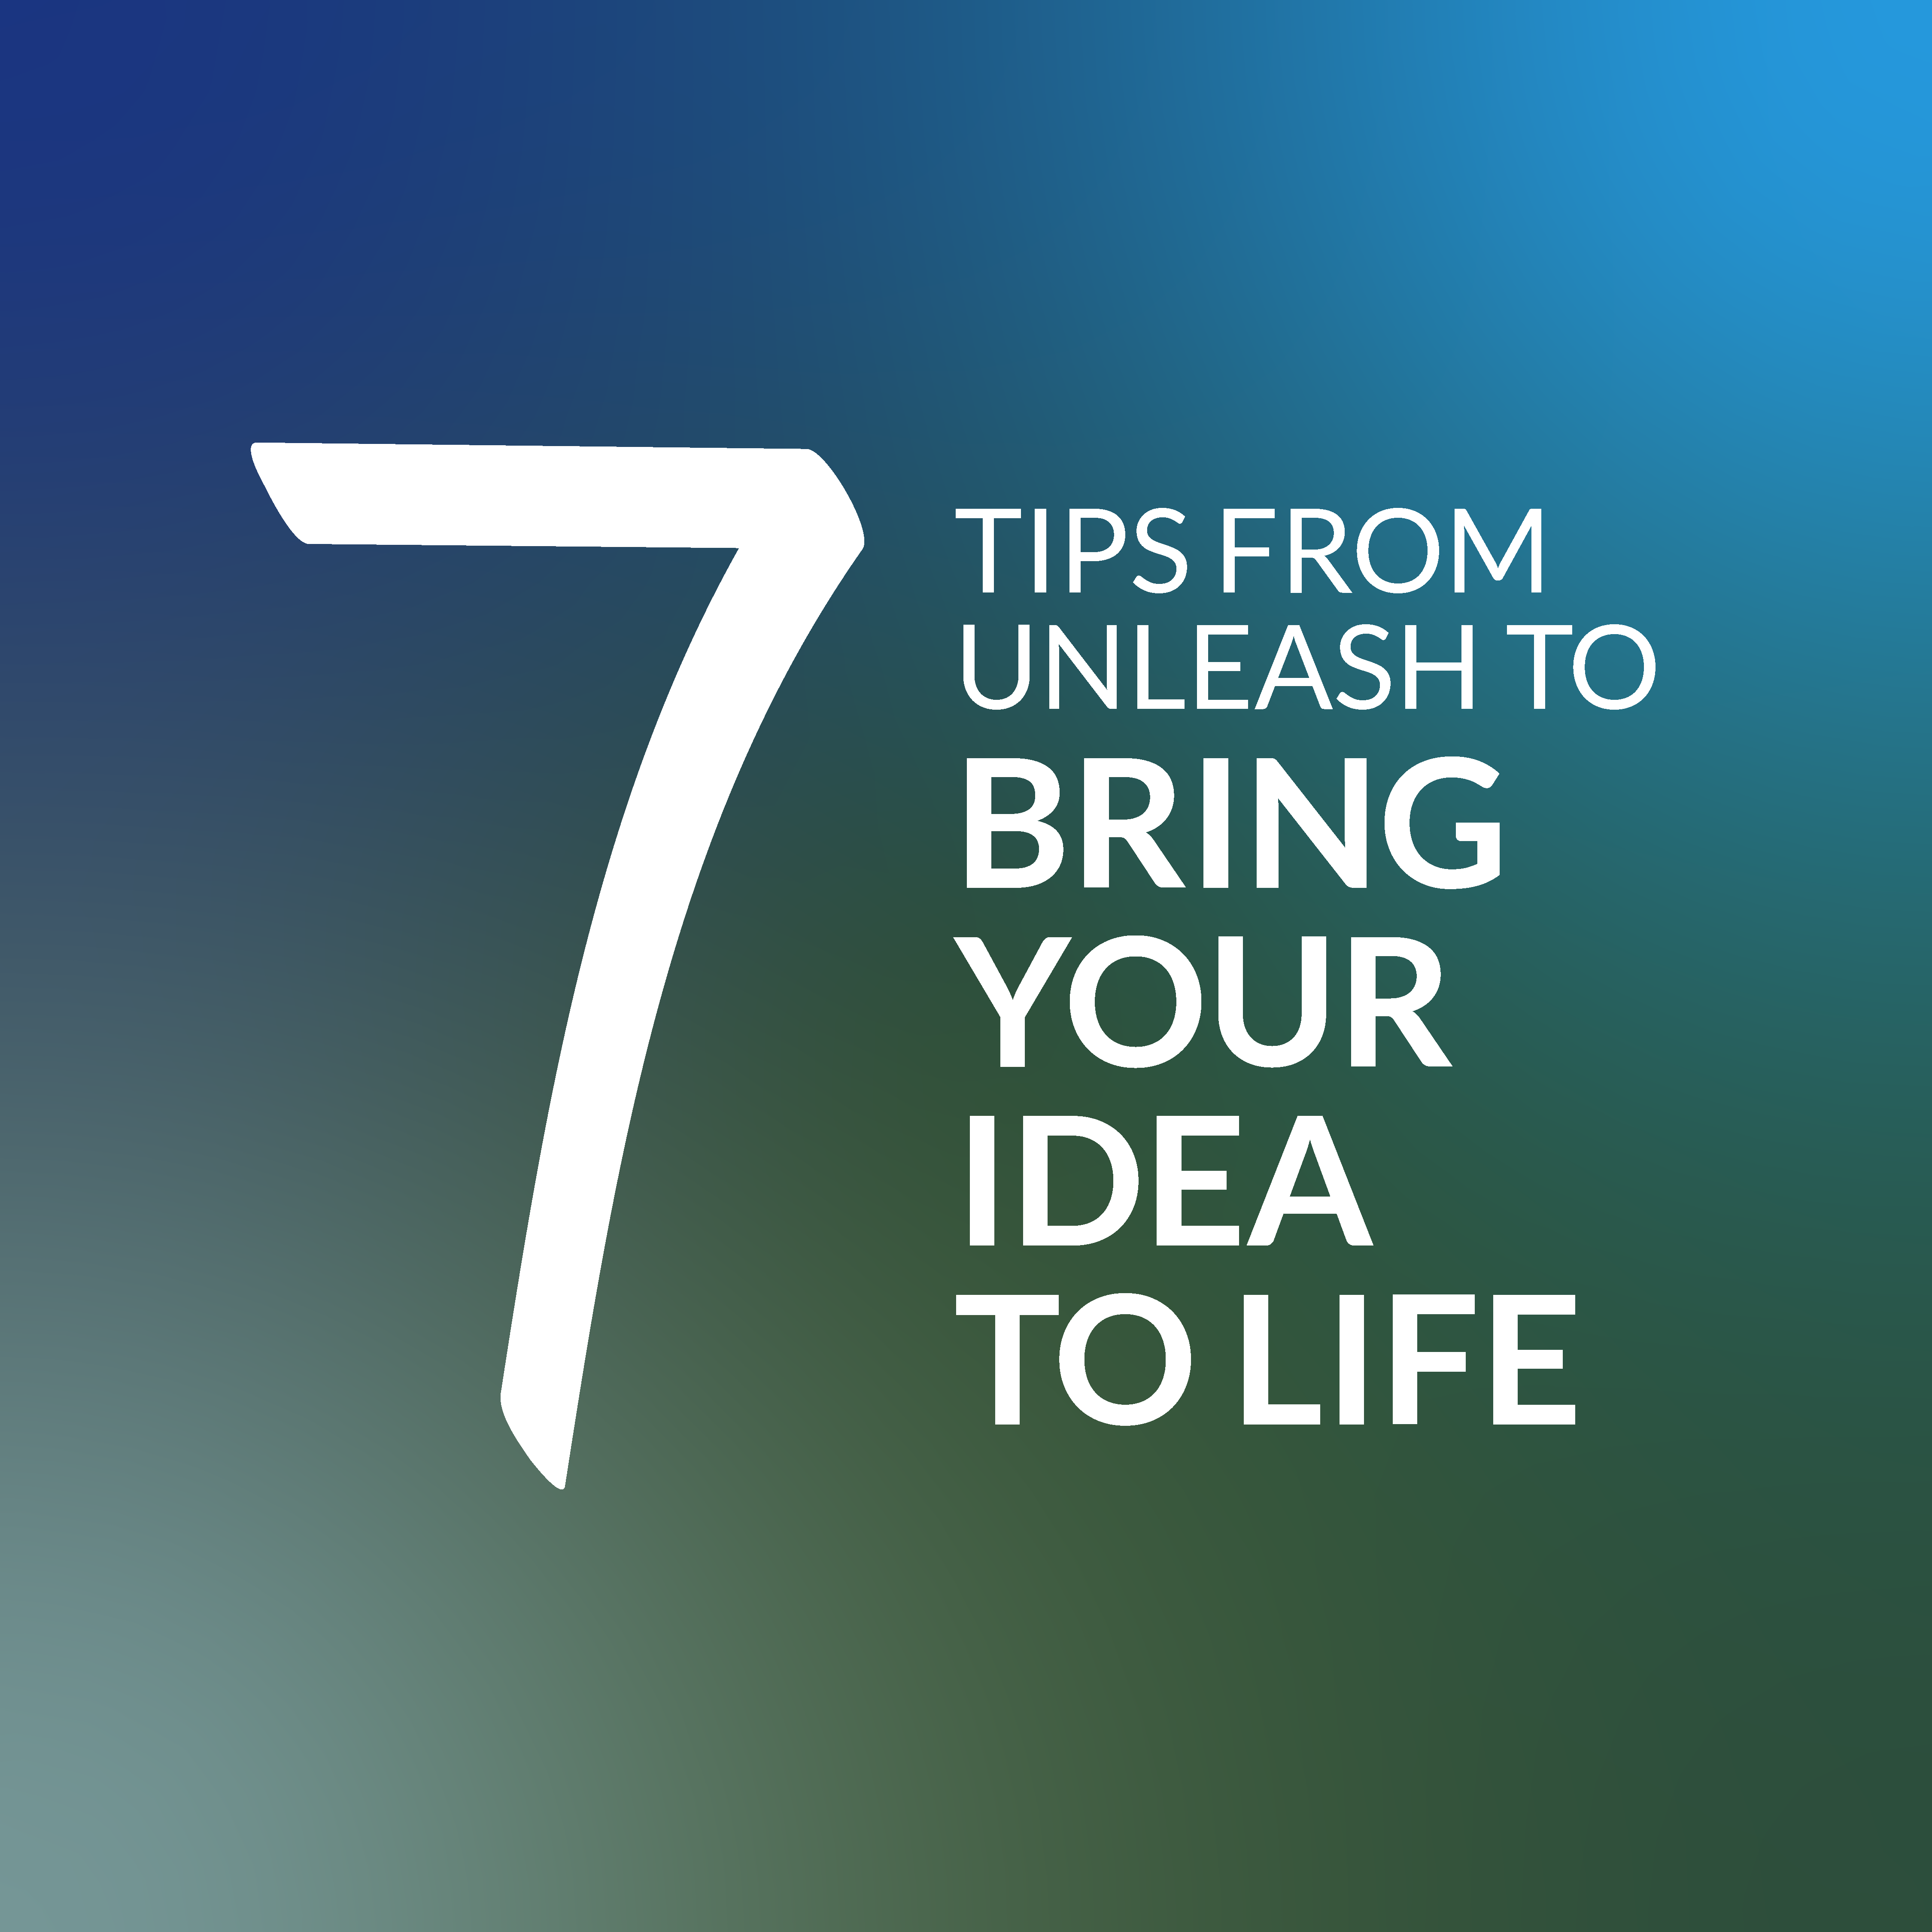 7 Tips from UNLEASH to Bring Your Idea to Life​